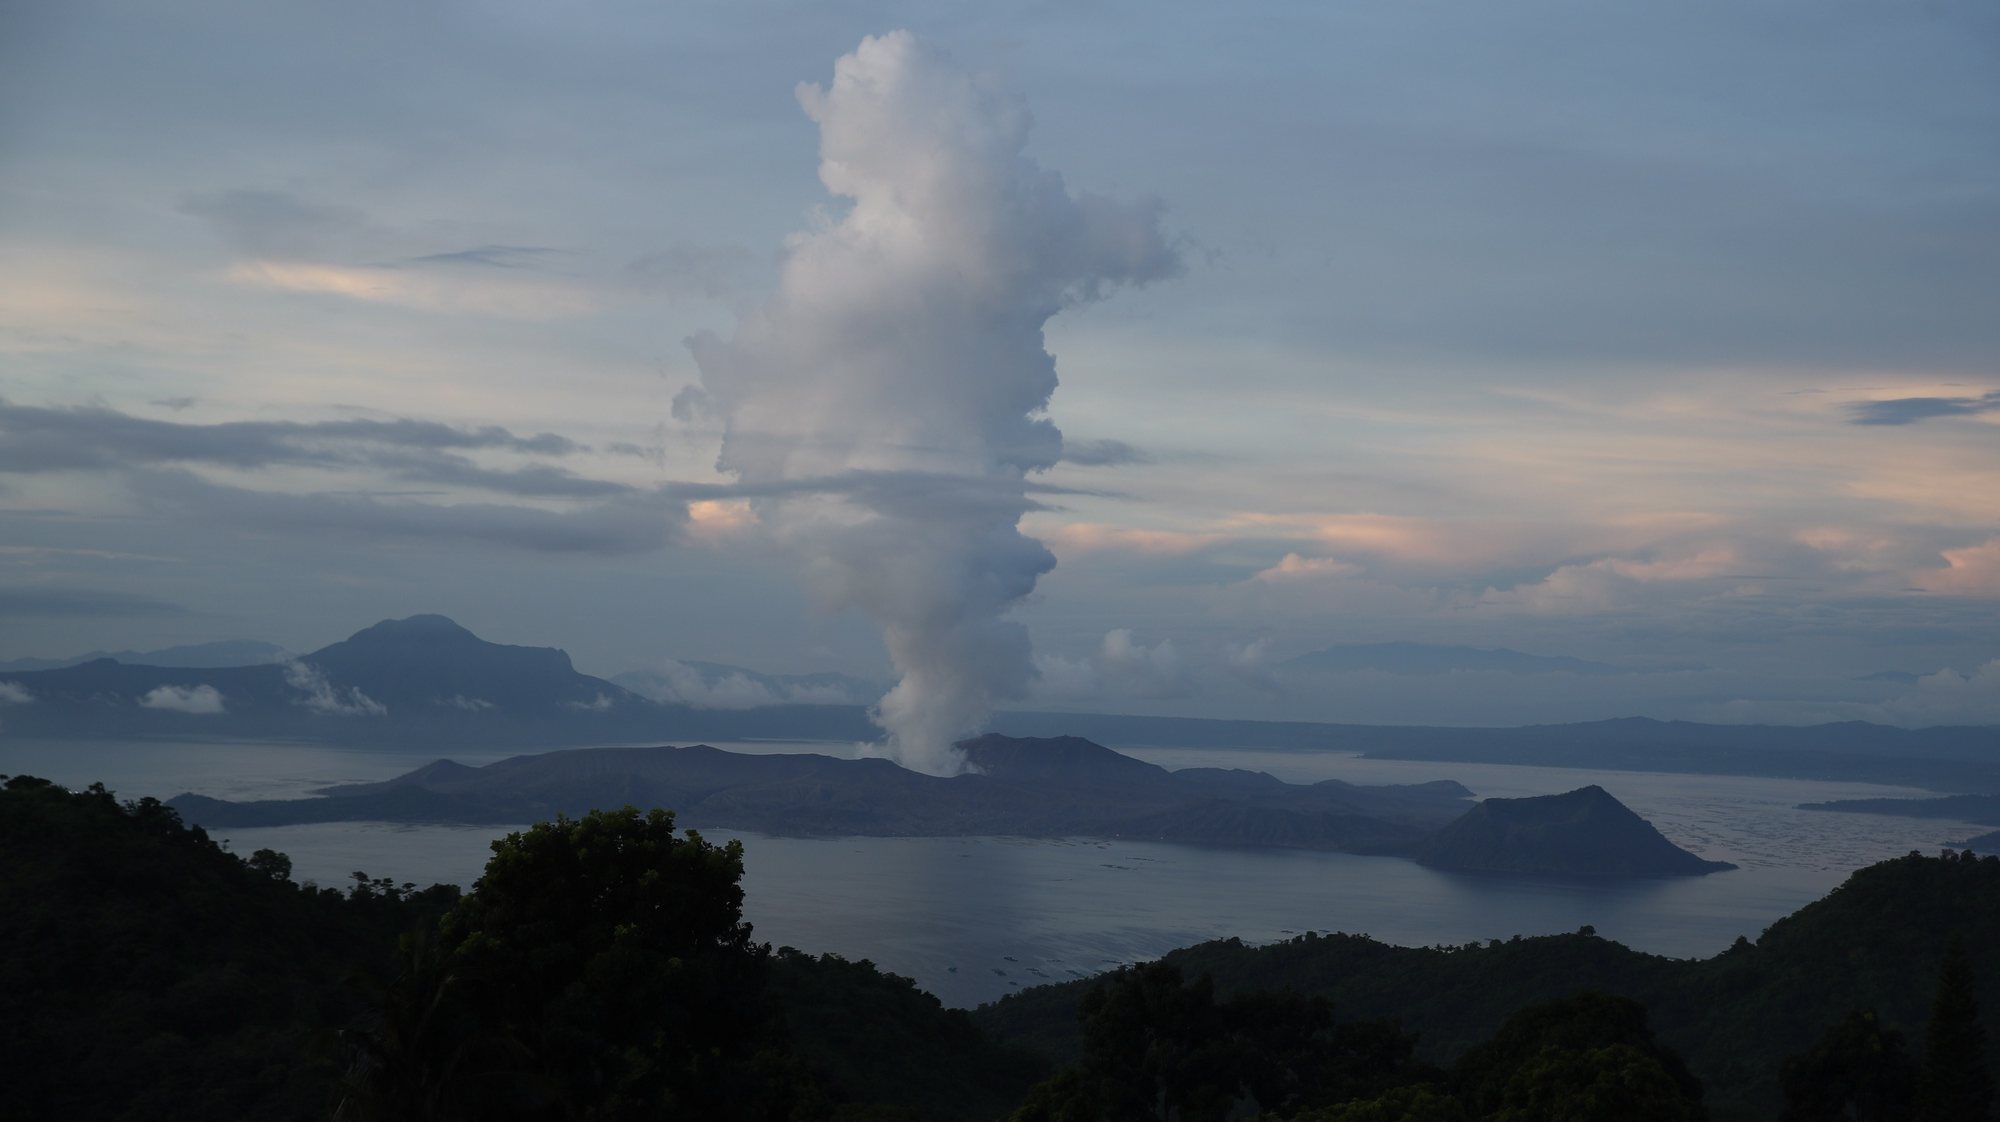 epa09323098 Smoke rises from Taal Volcano as seen from Tagaytay city, Batangas province, Philippines, 05 July 2021. According to the Philippine Institute of Volcanology and Seismology (Phivolcs) latest bulletin on 04 July, the highest level of volcanic sulfur dioxide gas emission was recorded at the Taal volcano and eruption may occur anytime soon. More than 3,000 residents from high-risk villages were evacuated after the volcano started spewing steam, filling the air with toxic gas and prompting health warnings.  EPA/FRANCIS R. MALASIG